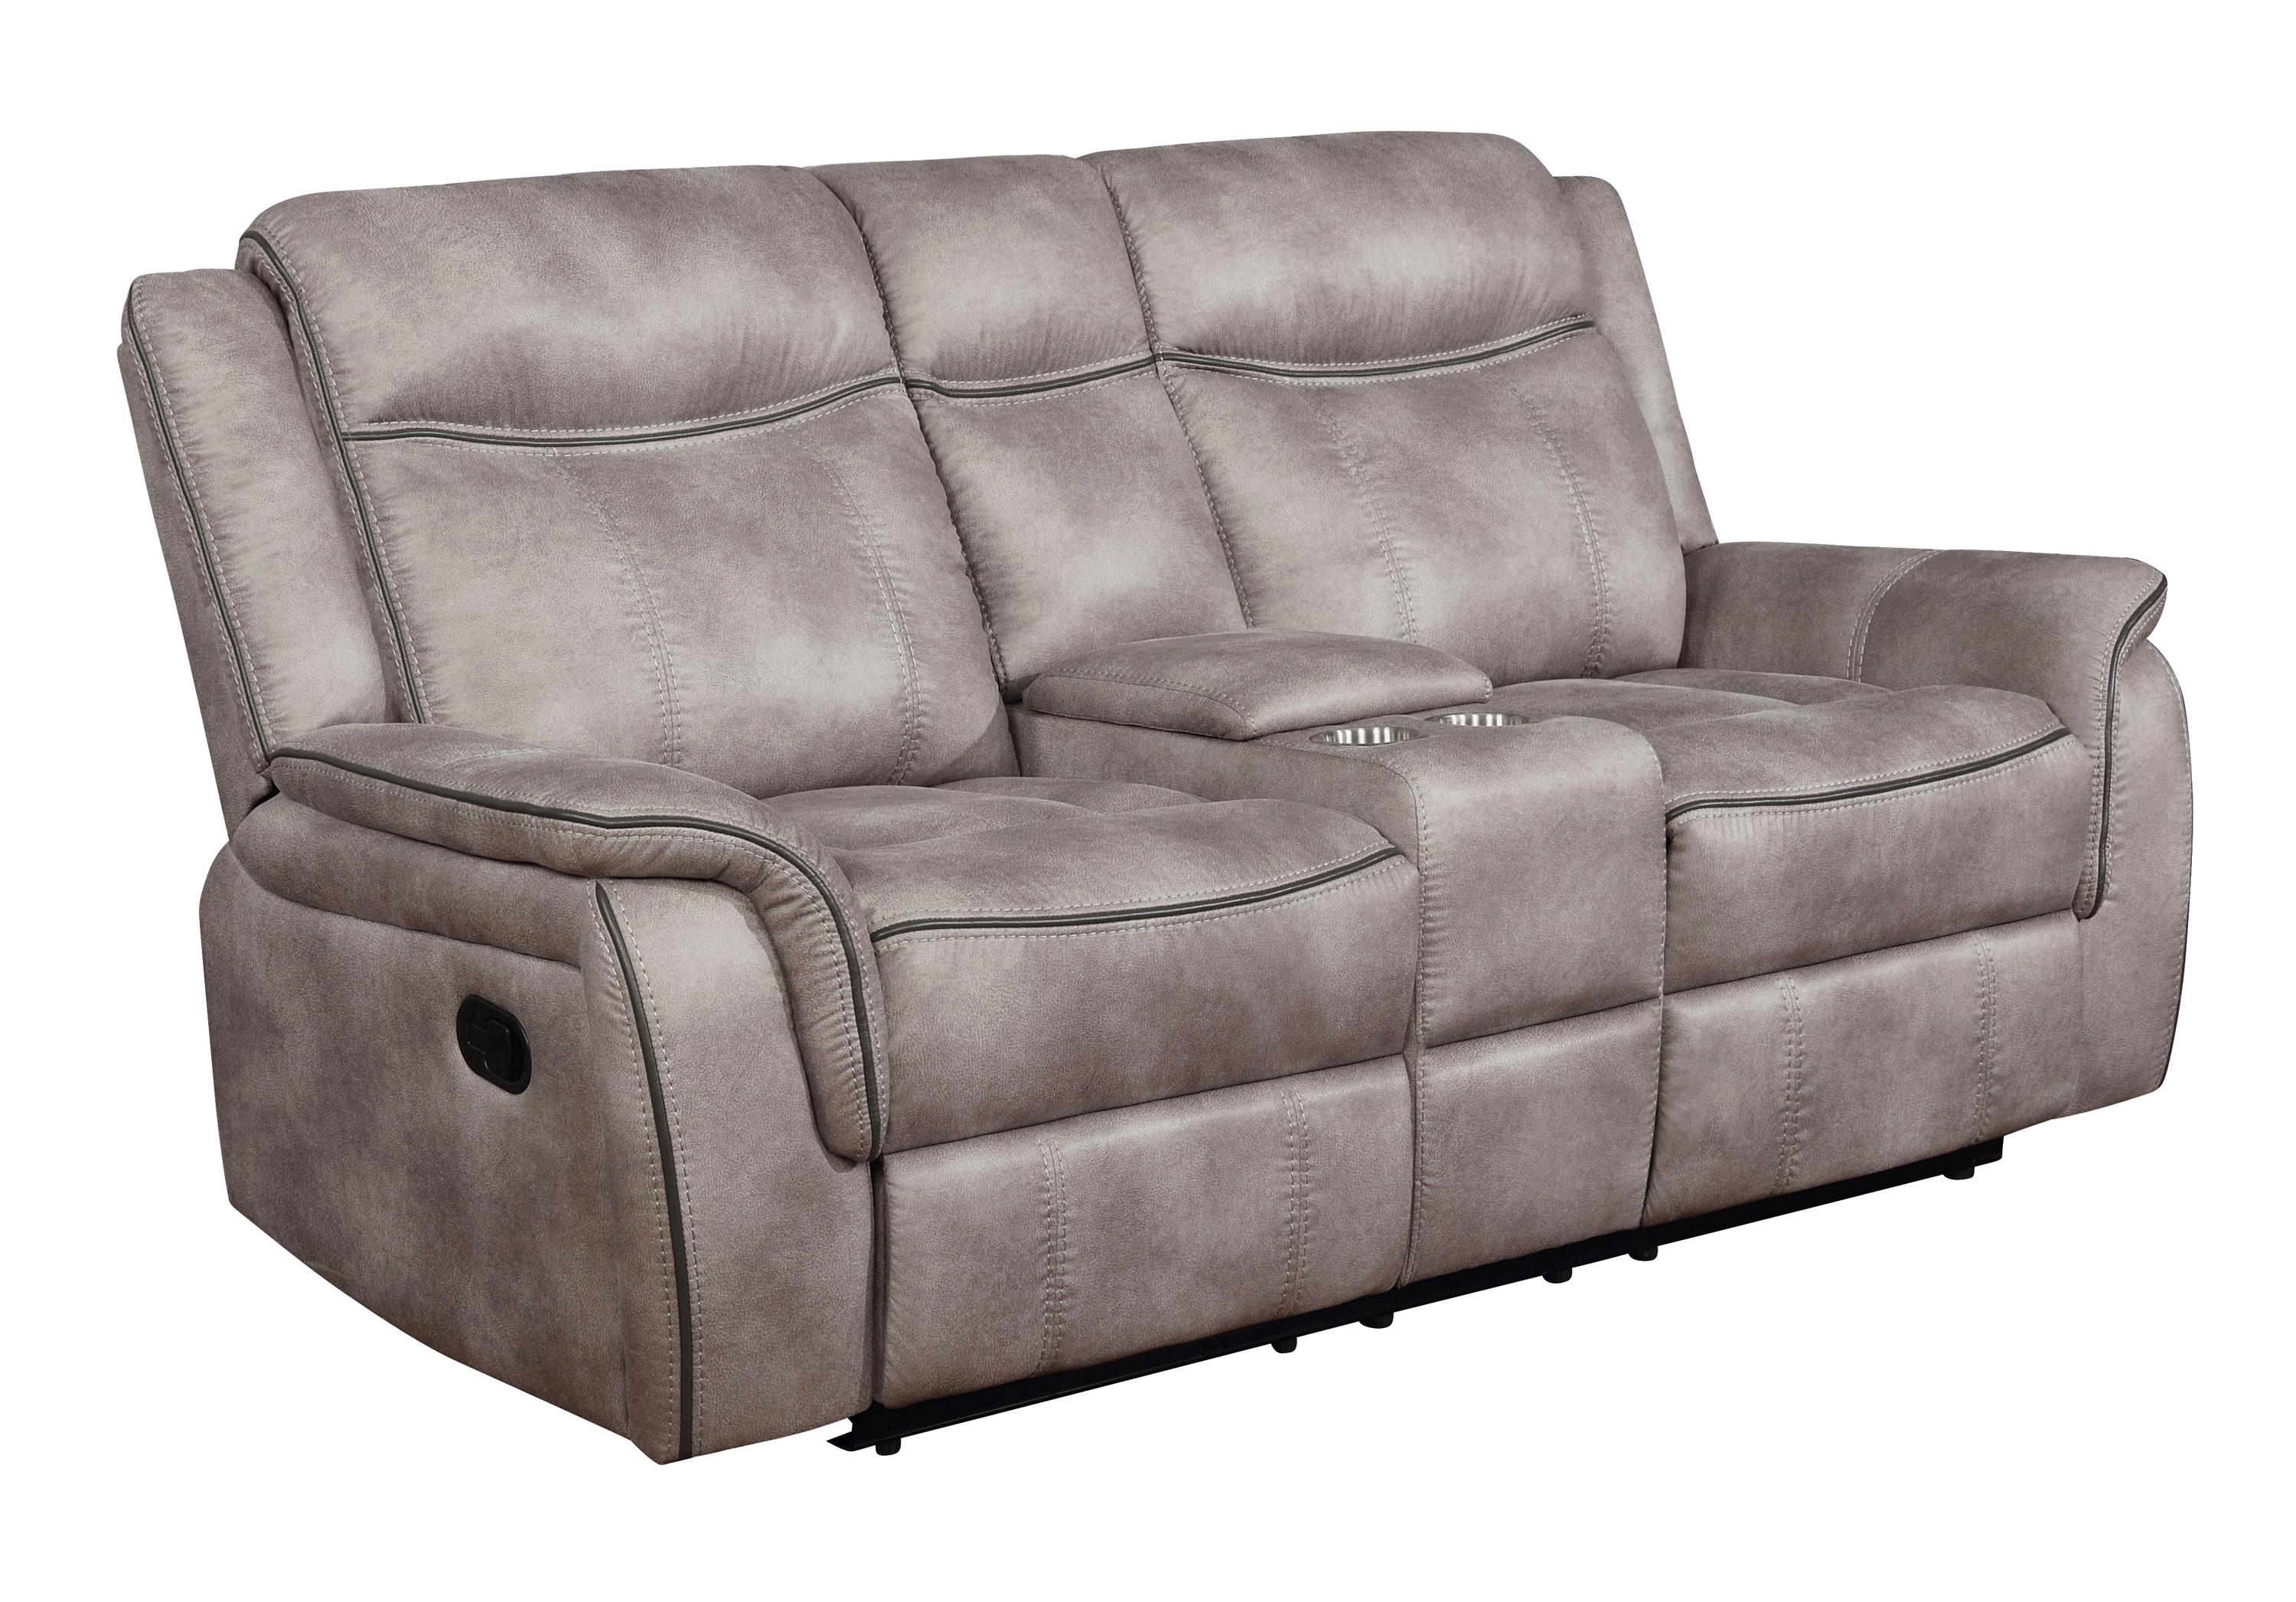 Transitional Motion Loveseat 603502 Lawrence 603502 in Taupe 